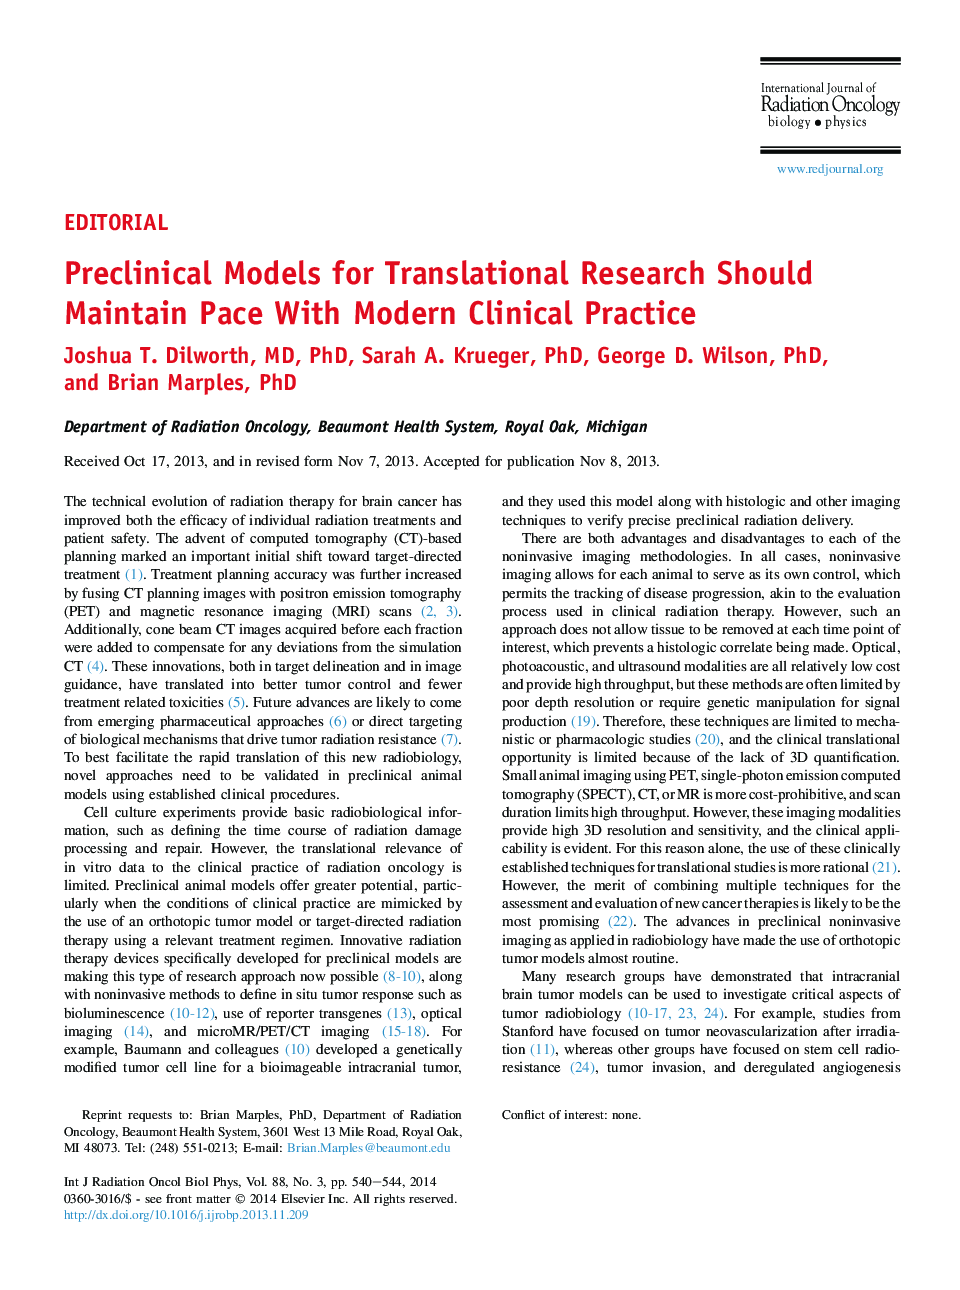 Preclinical Models for Translational Research Should Maintain Pace With Modern Clinical Practice